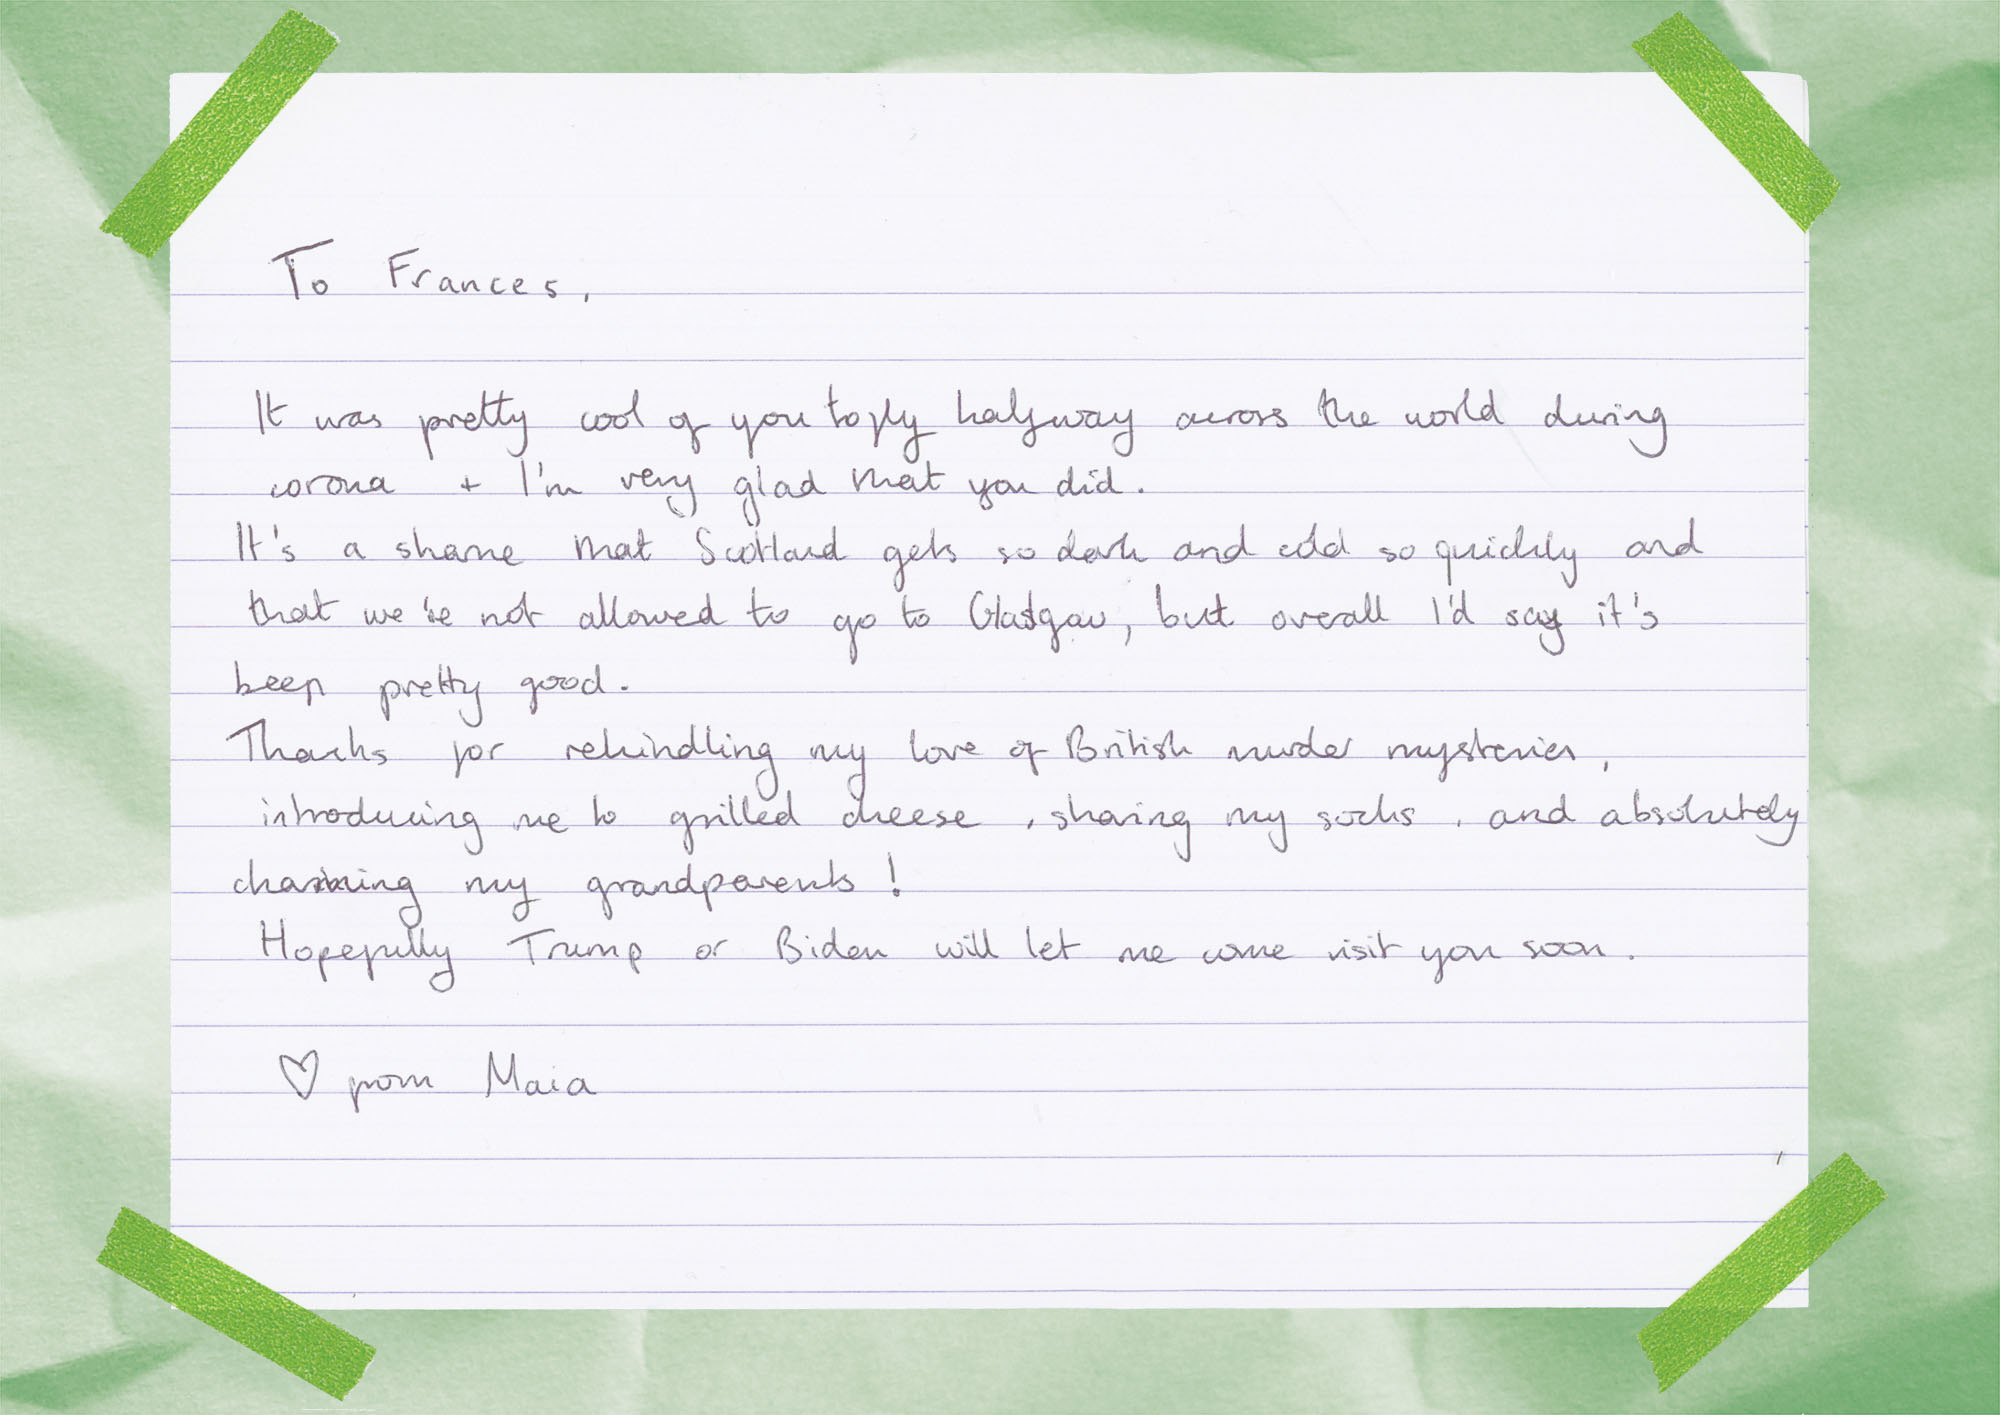 Maia's letter to Frances